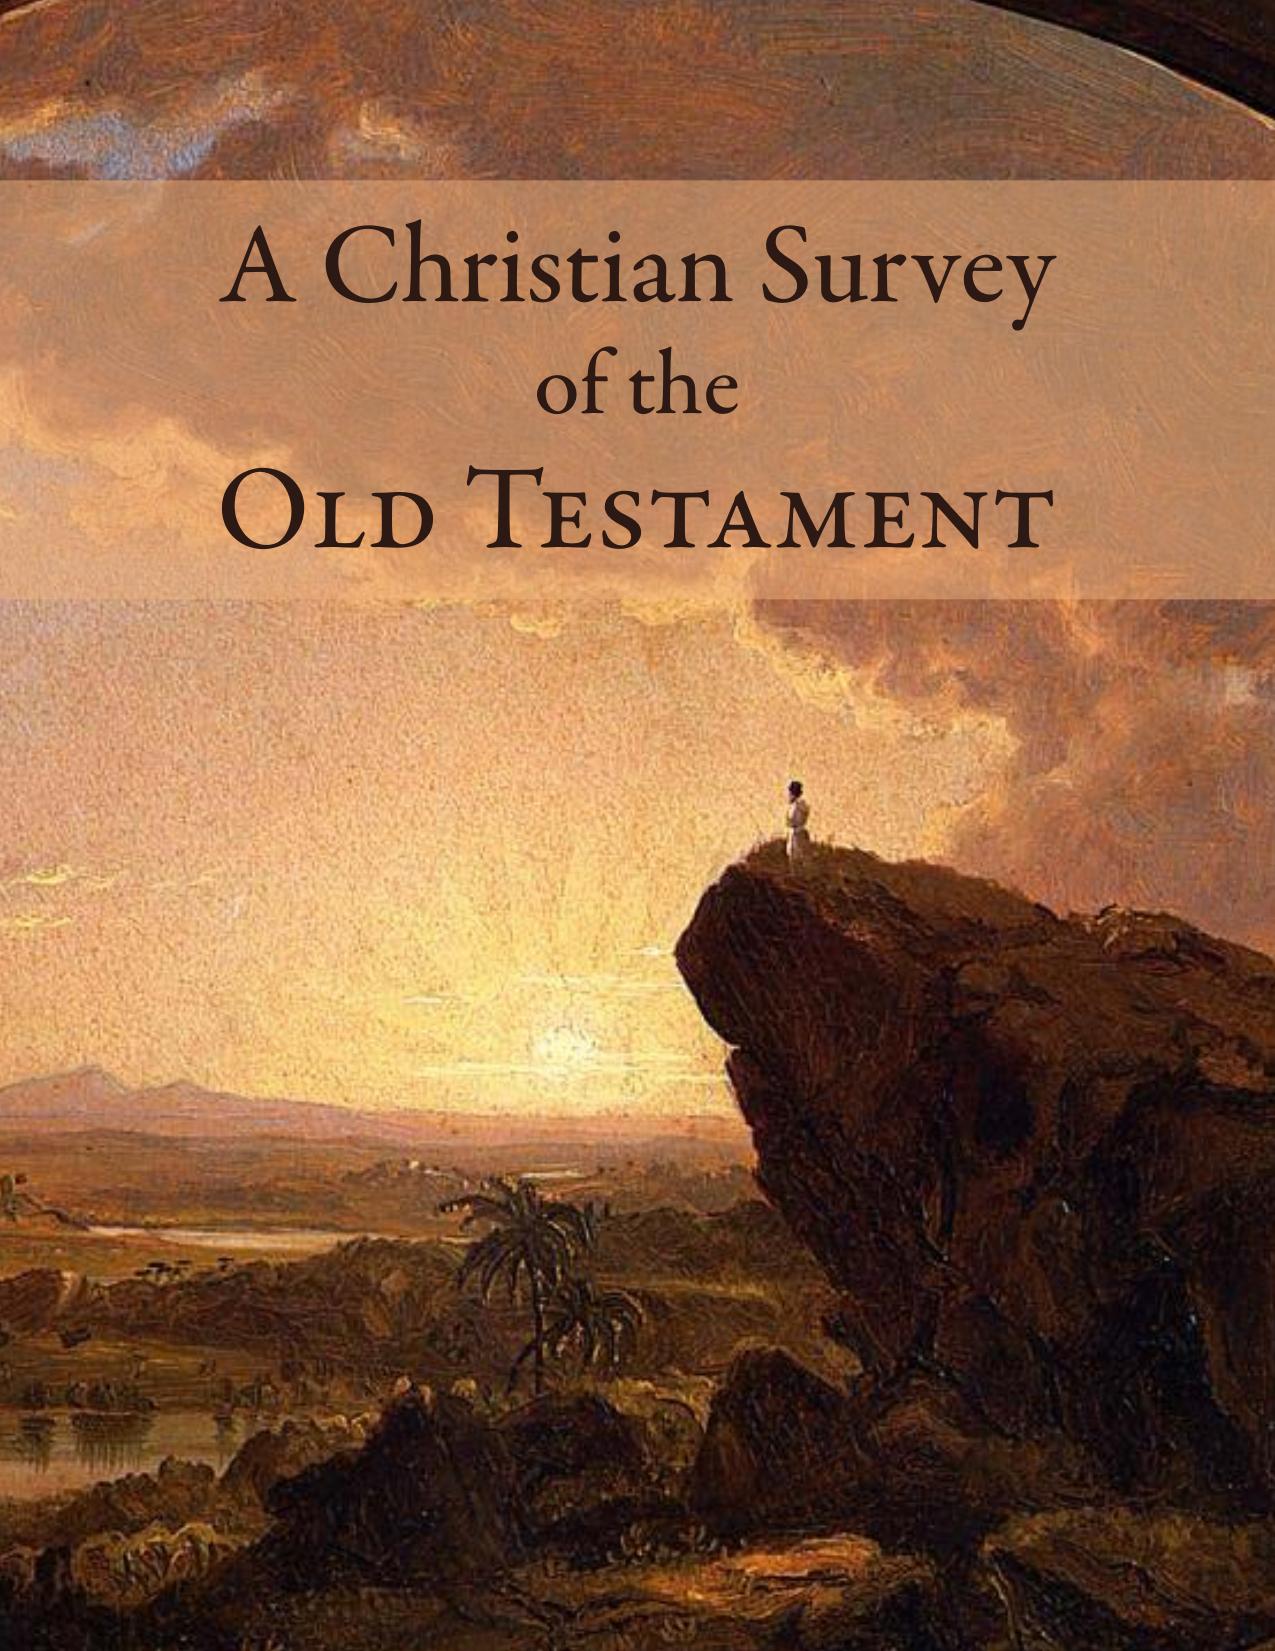 A Christian Survey of the Old Testament